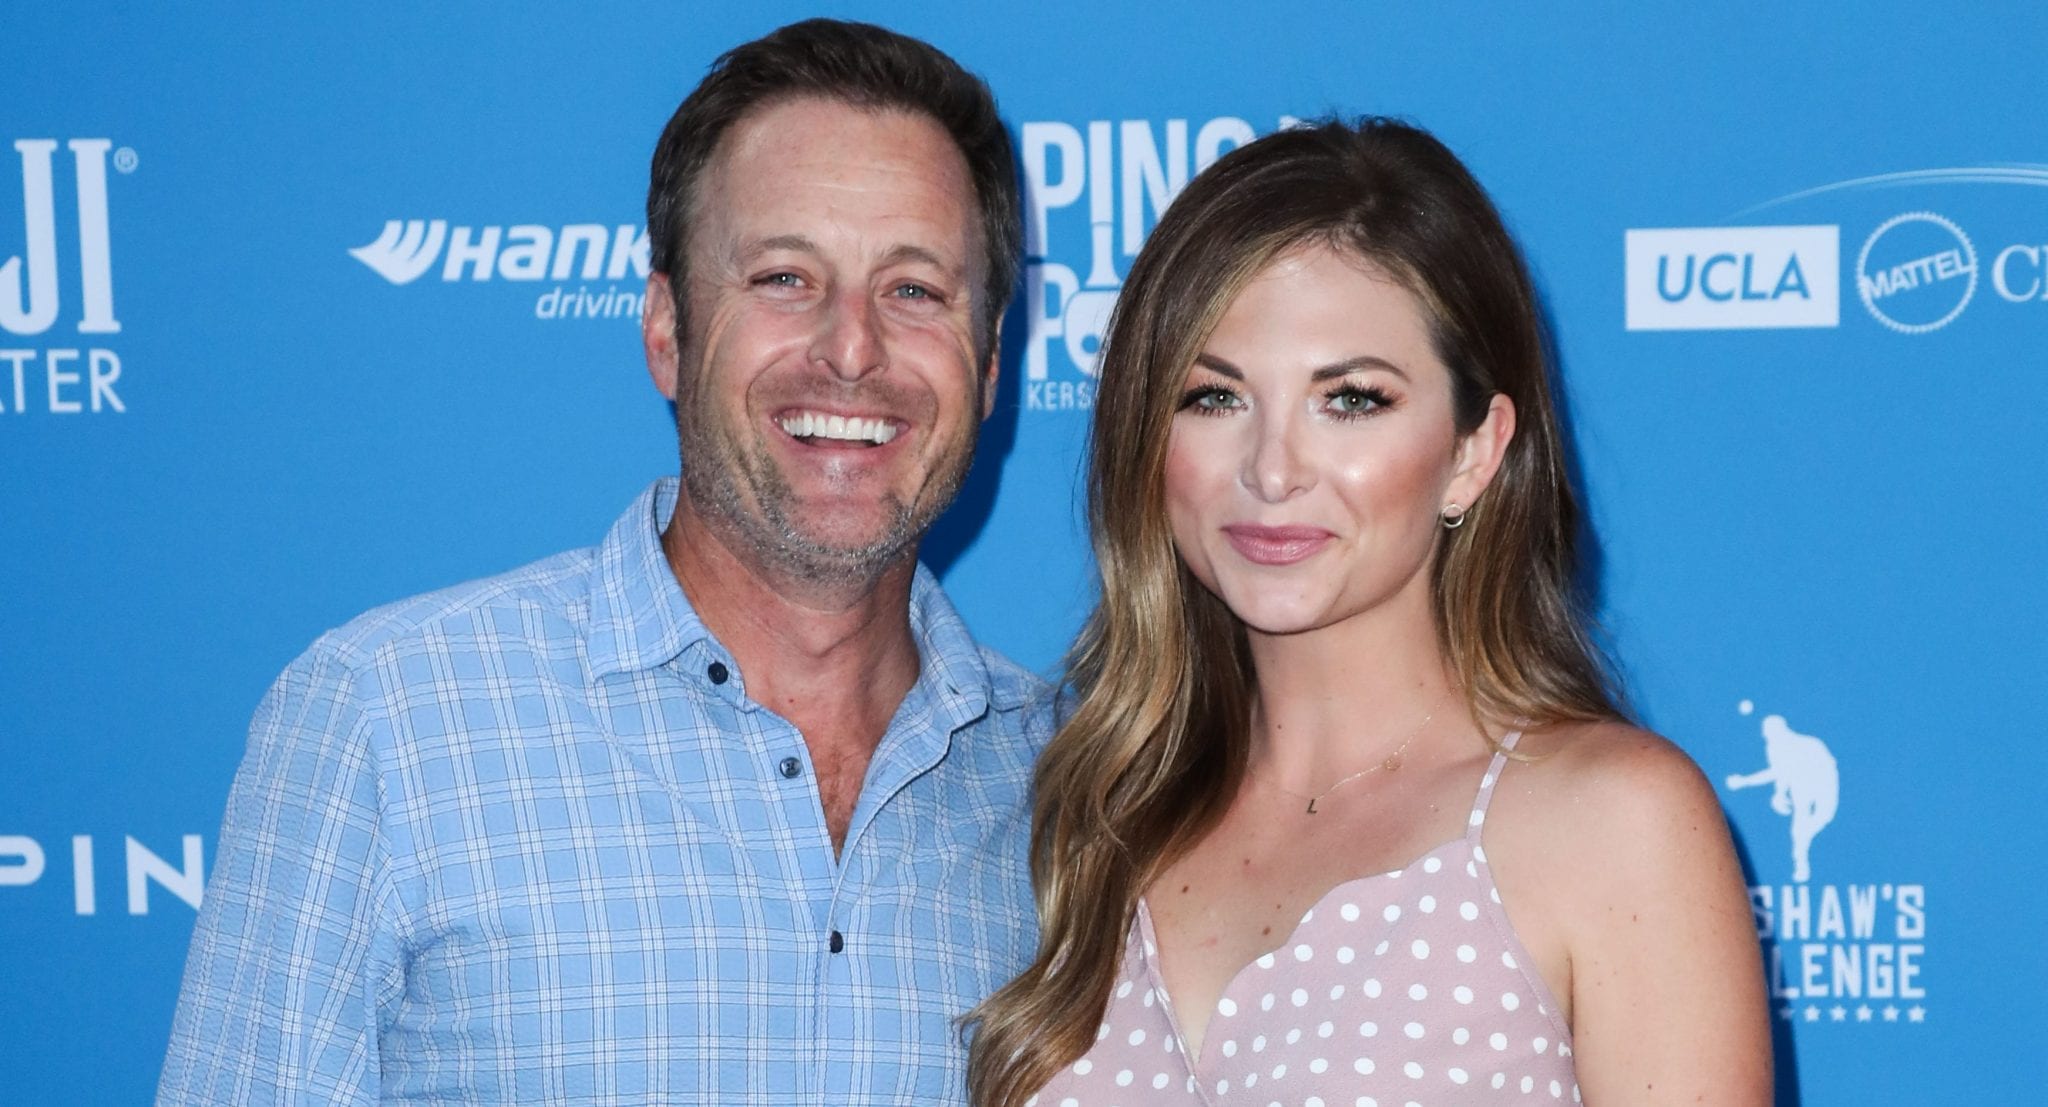 Who is Chris Harrison dating?